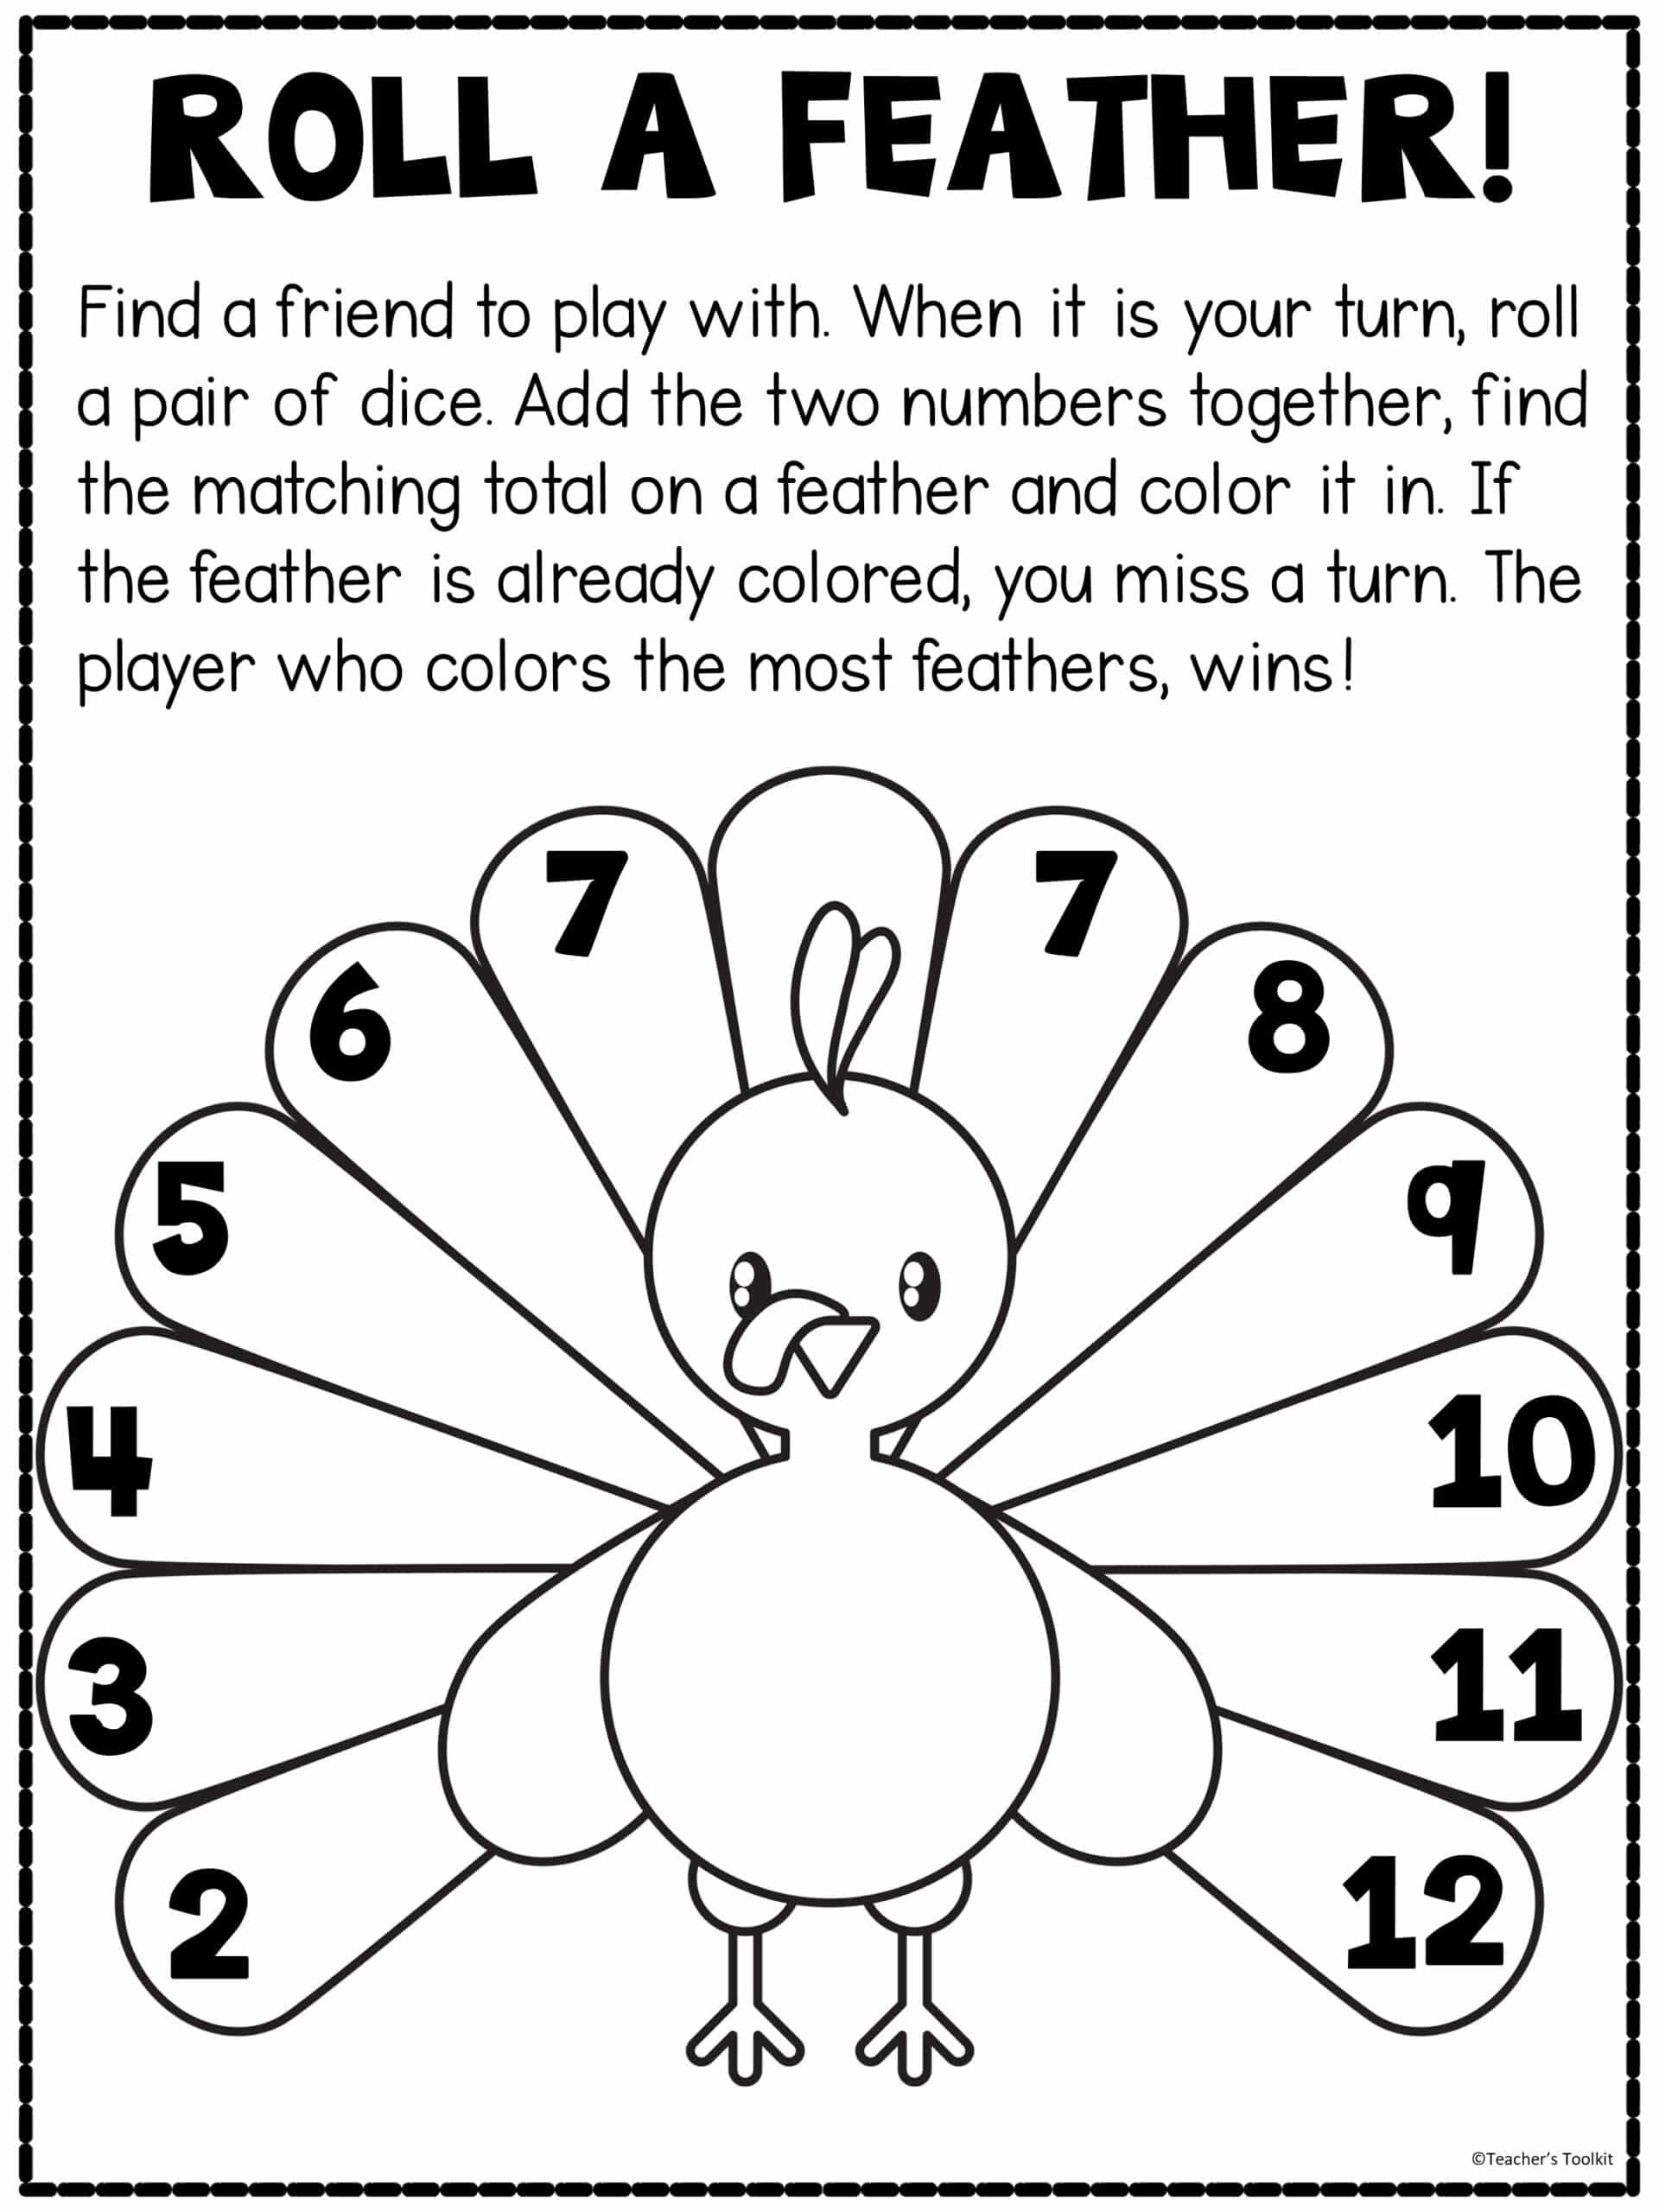 Image of a turkey with text "Roll a Feather Game"